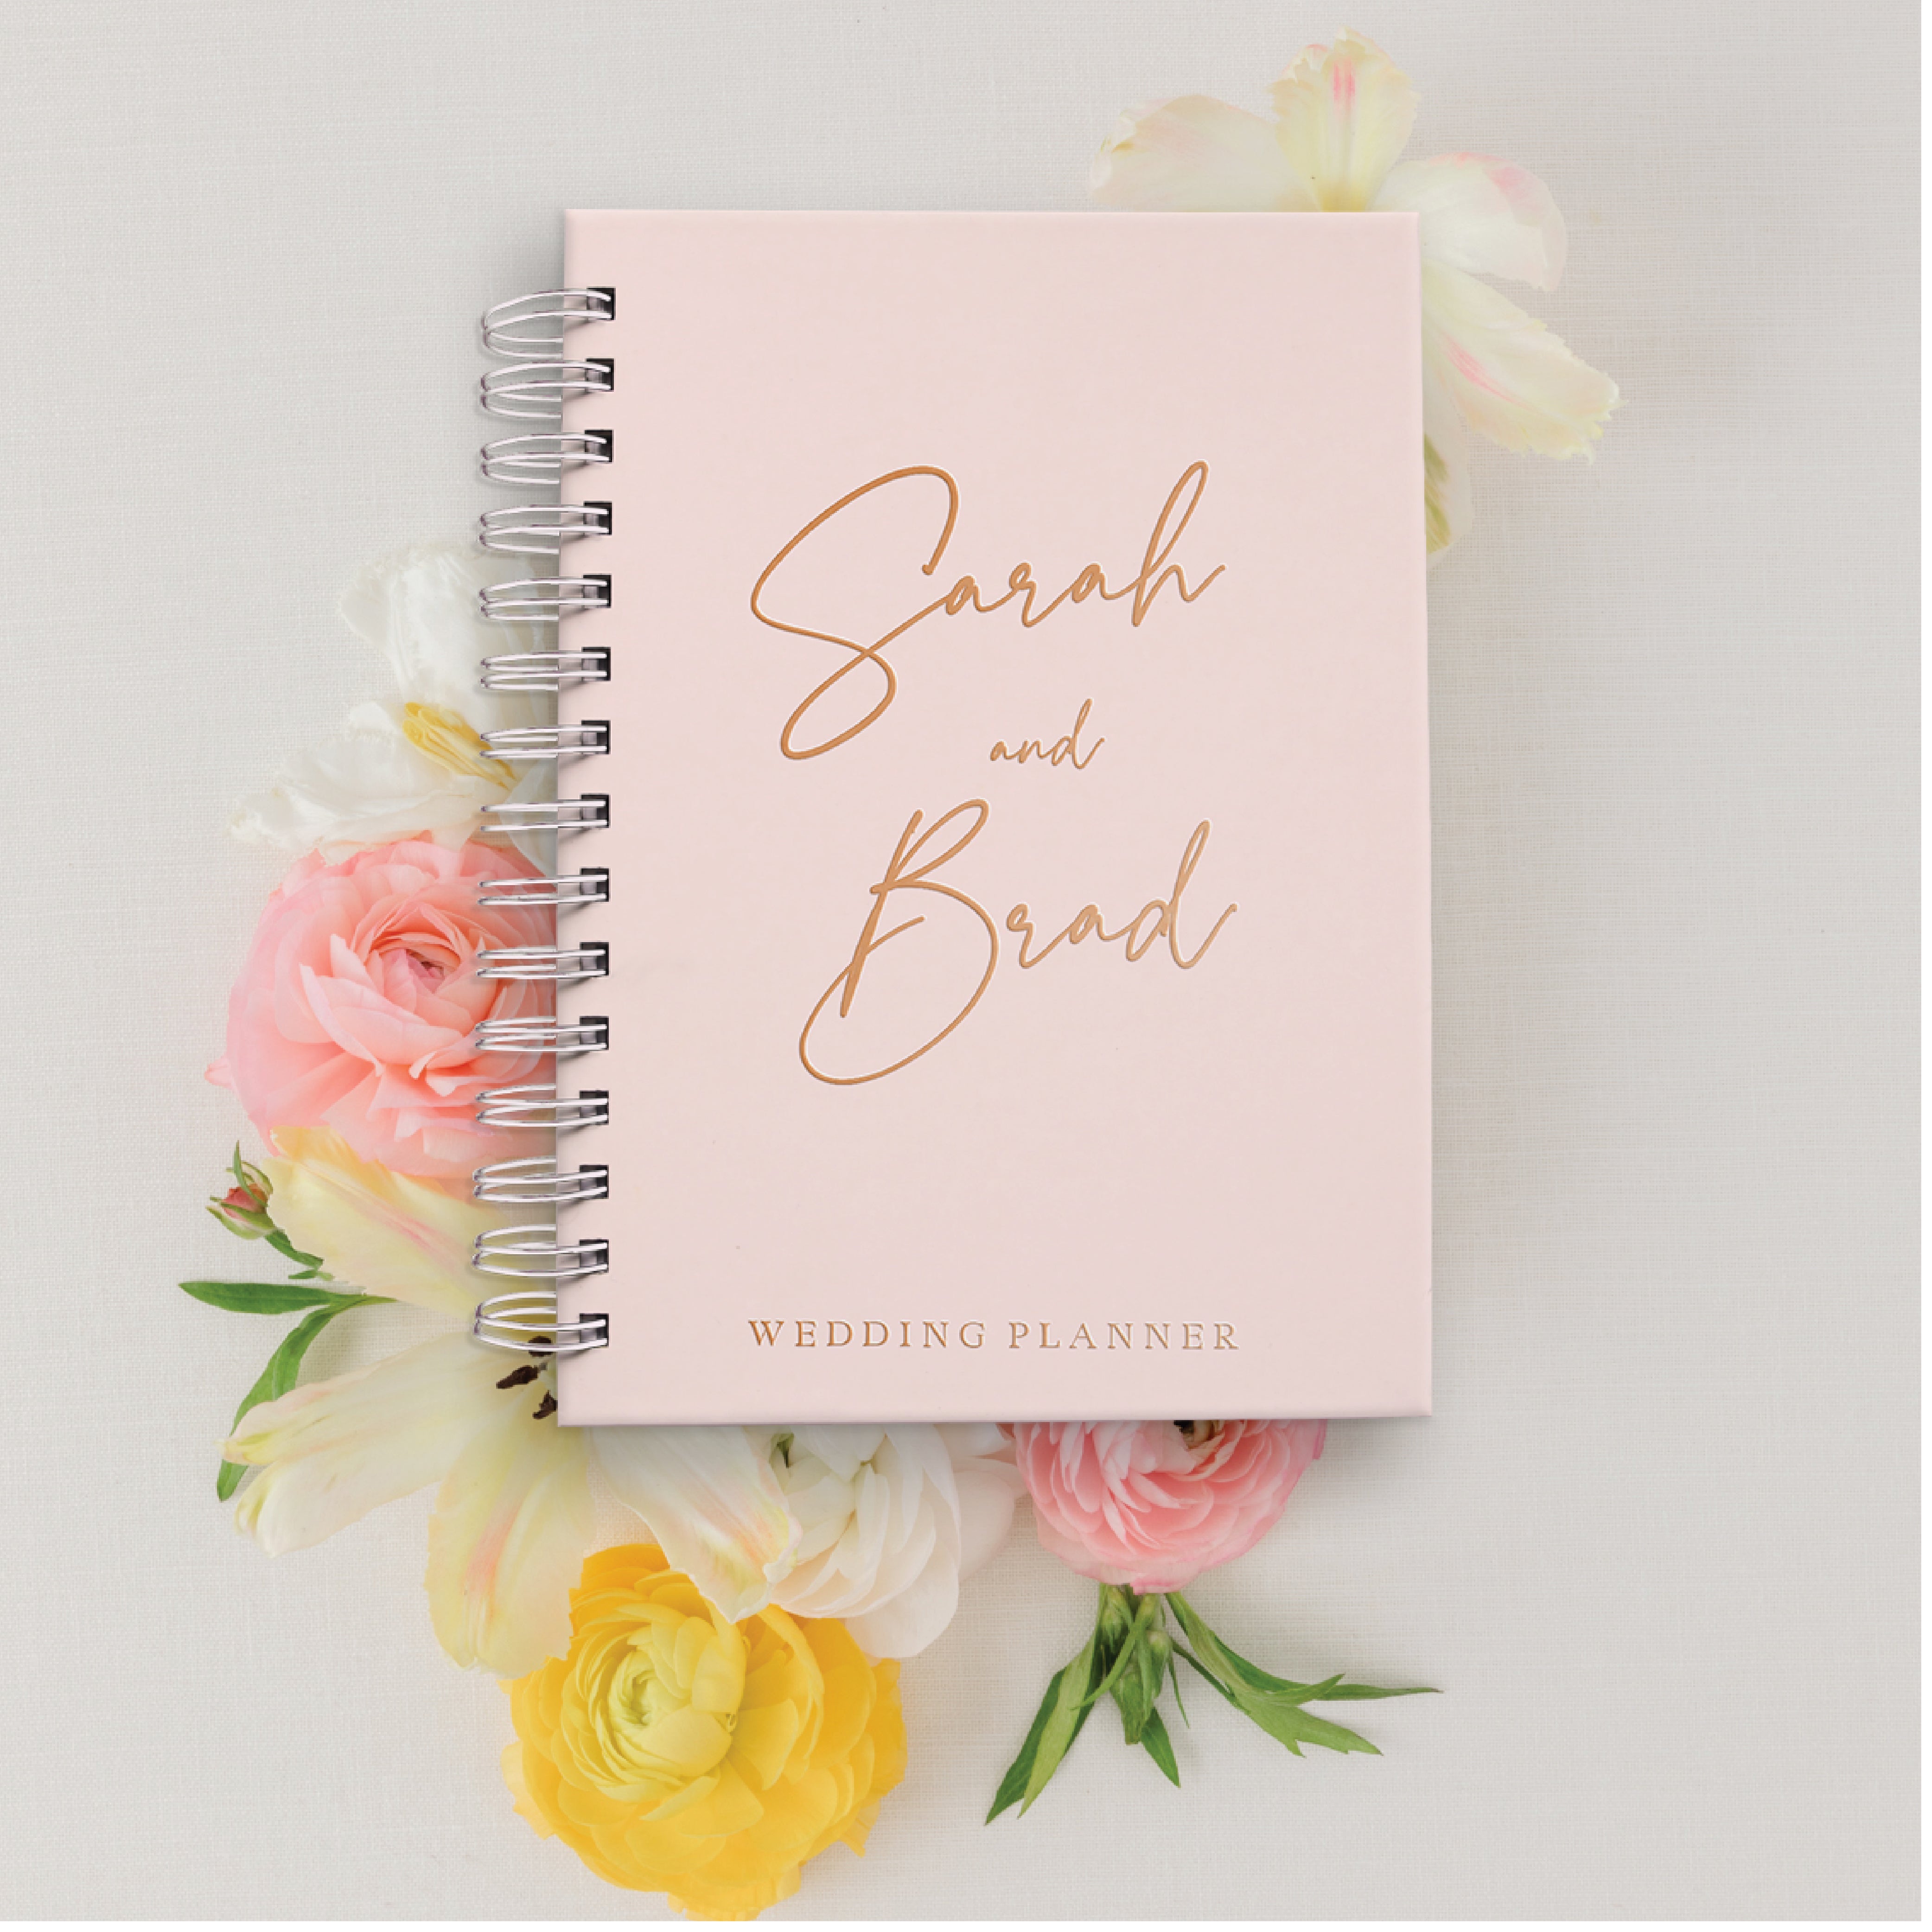 Get ready to plan your dream wedding with our Modern Wedding Planner. This modern planner is designed specifically for the bride-to-be, making wedding planning a fun and stress-free experience. Stay organized and on top of every detail for your special day.